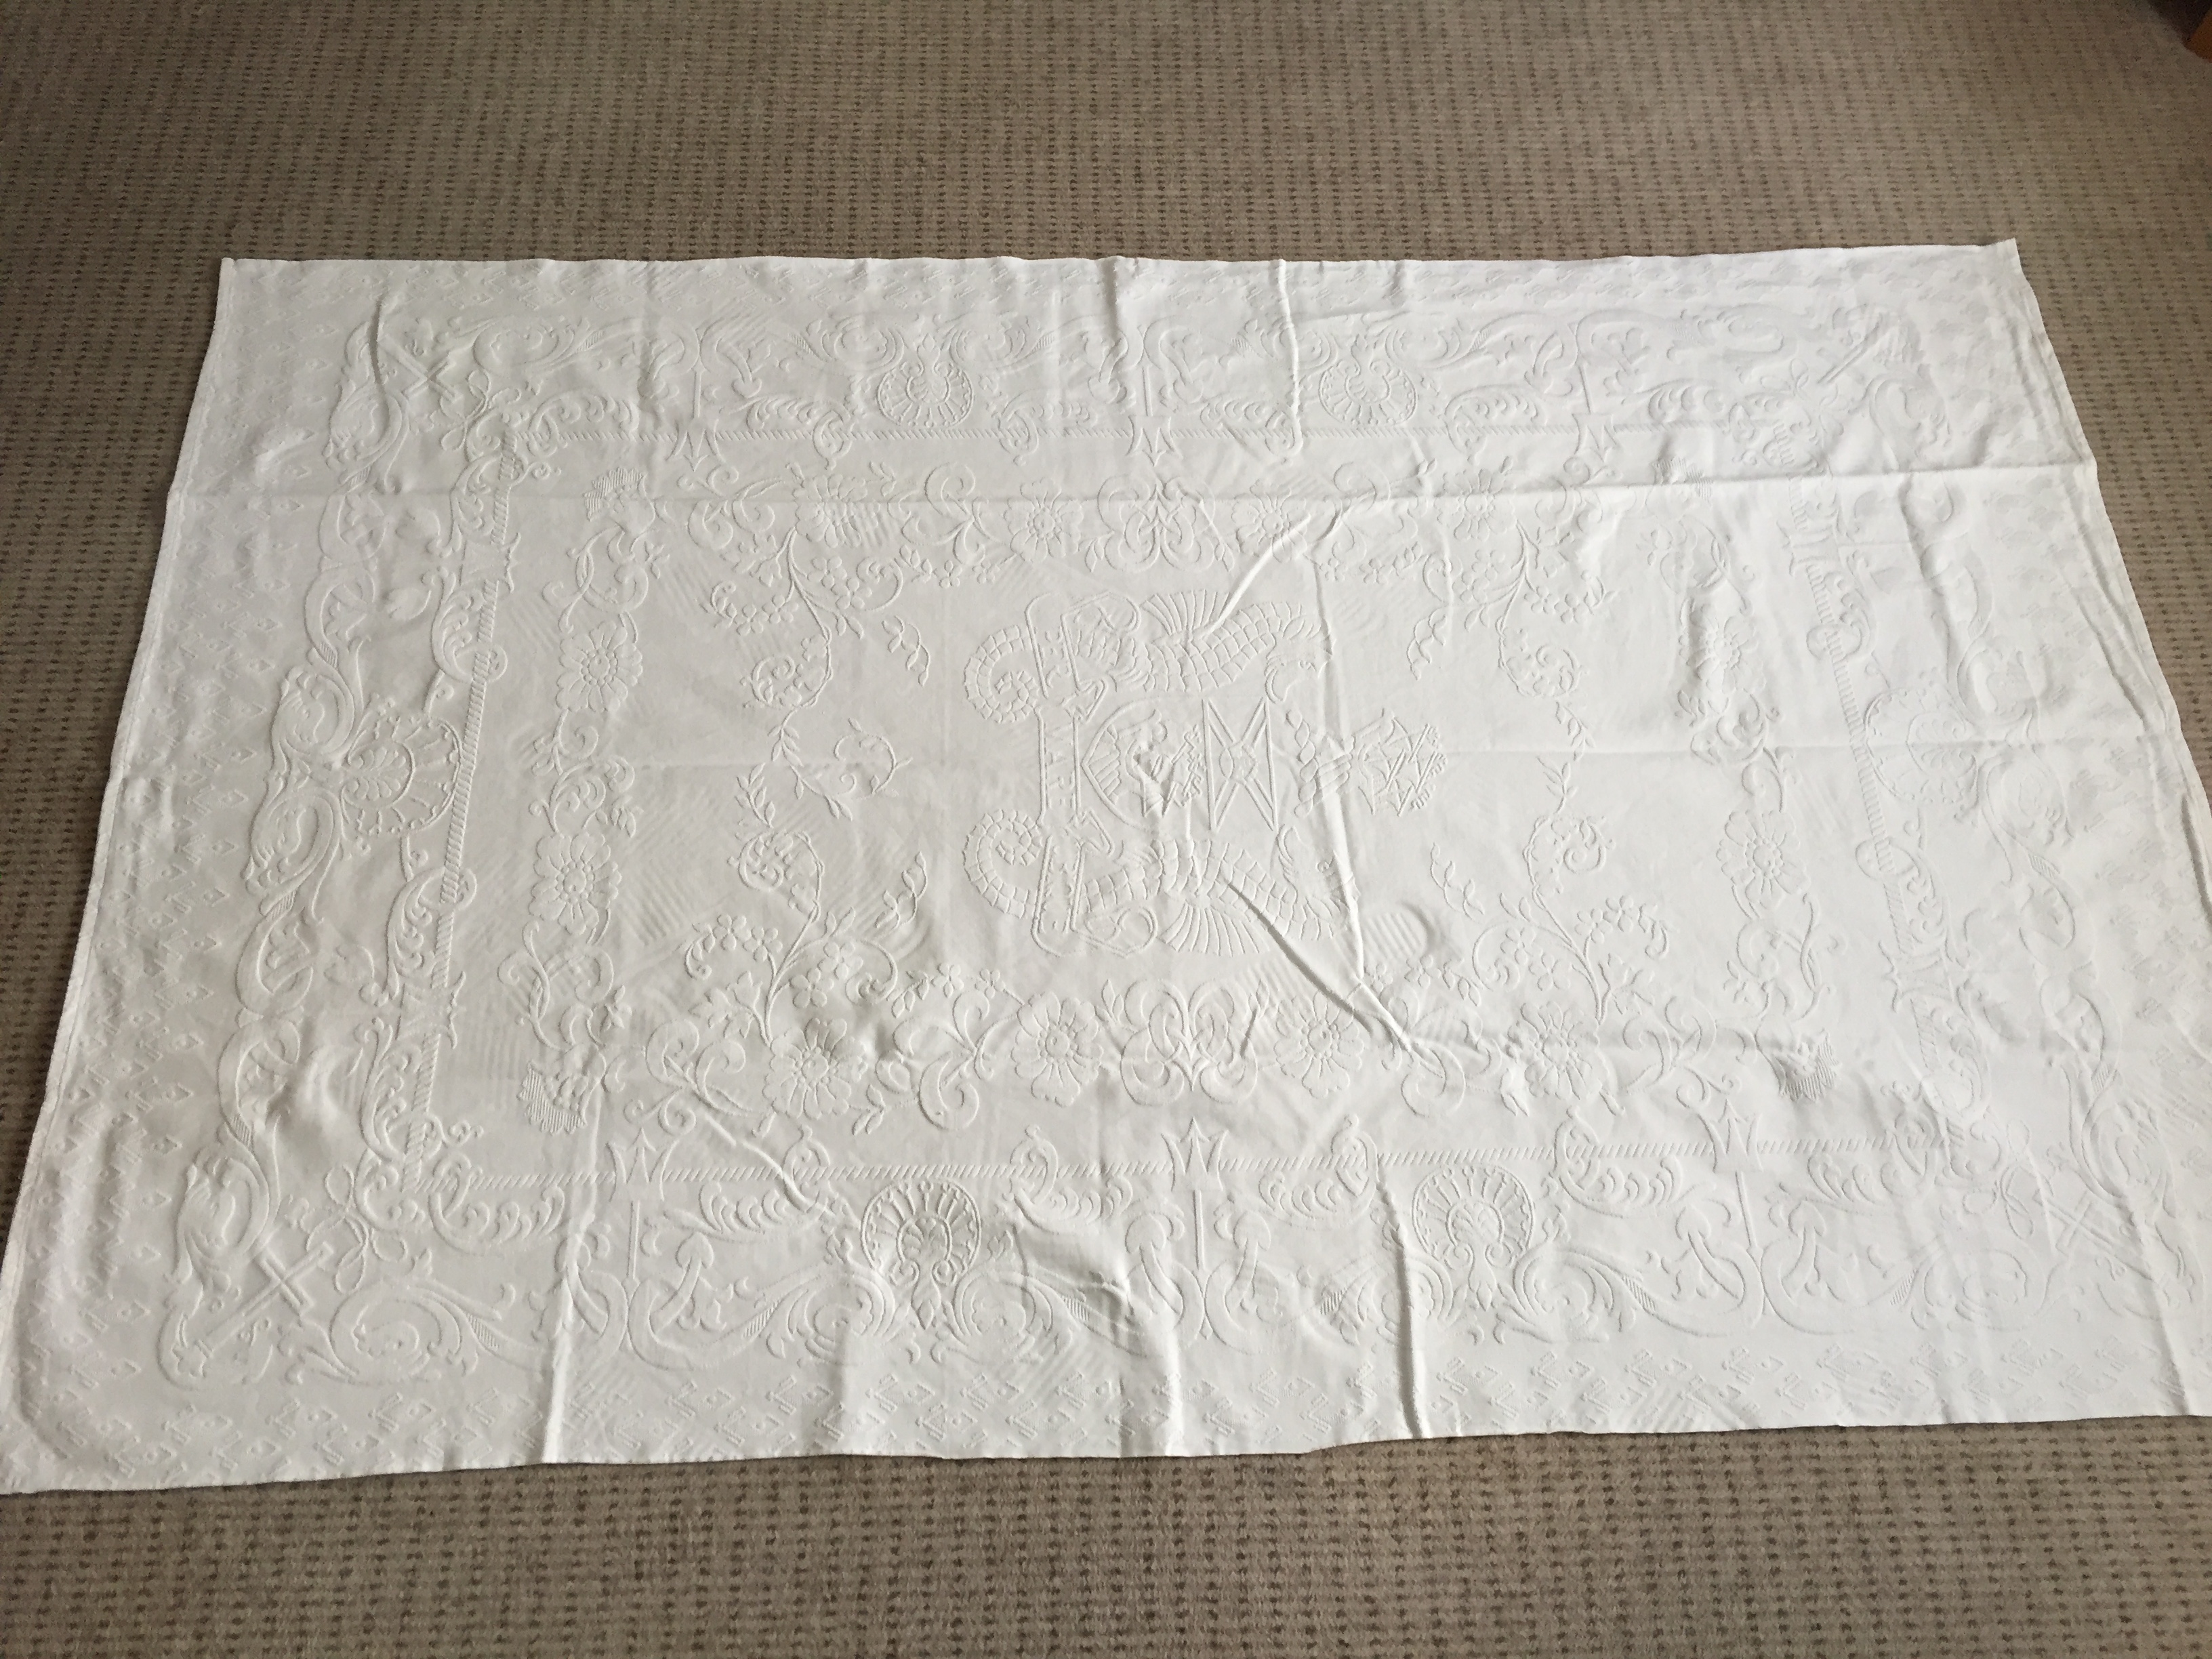 AS USED IN SERVICE LARGE EMBOSSED DINING TABLE CLOTH FROM THE ROYAL MAIL LINE SHIPPING COMPANY